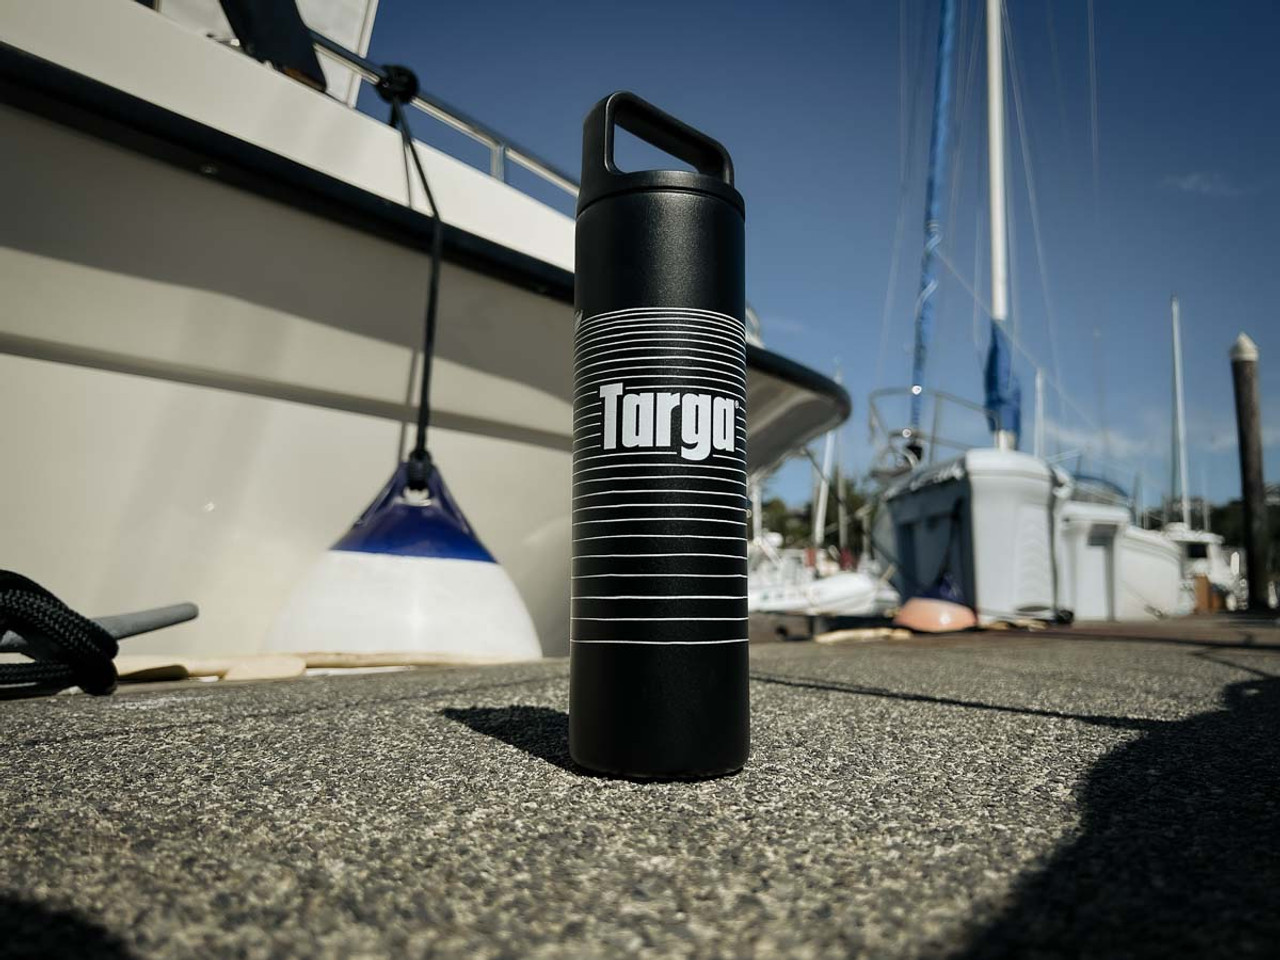 MiiR 20oz Wide Mouth Bottle - Vacuum Insulated